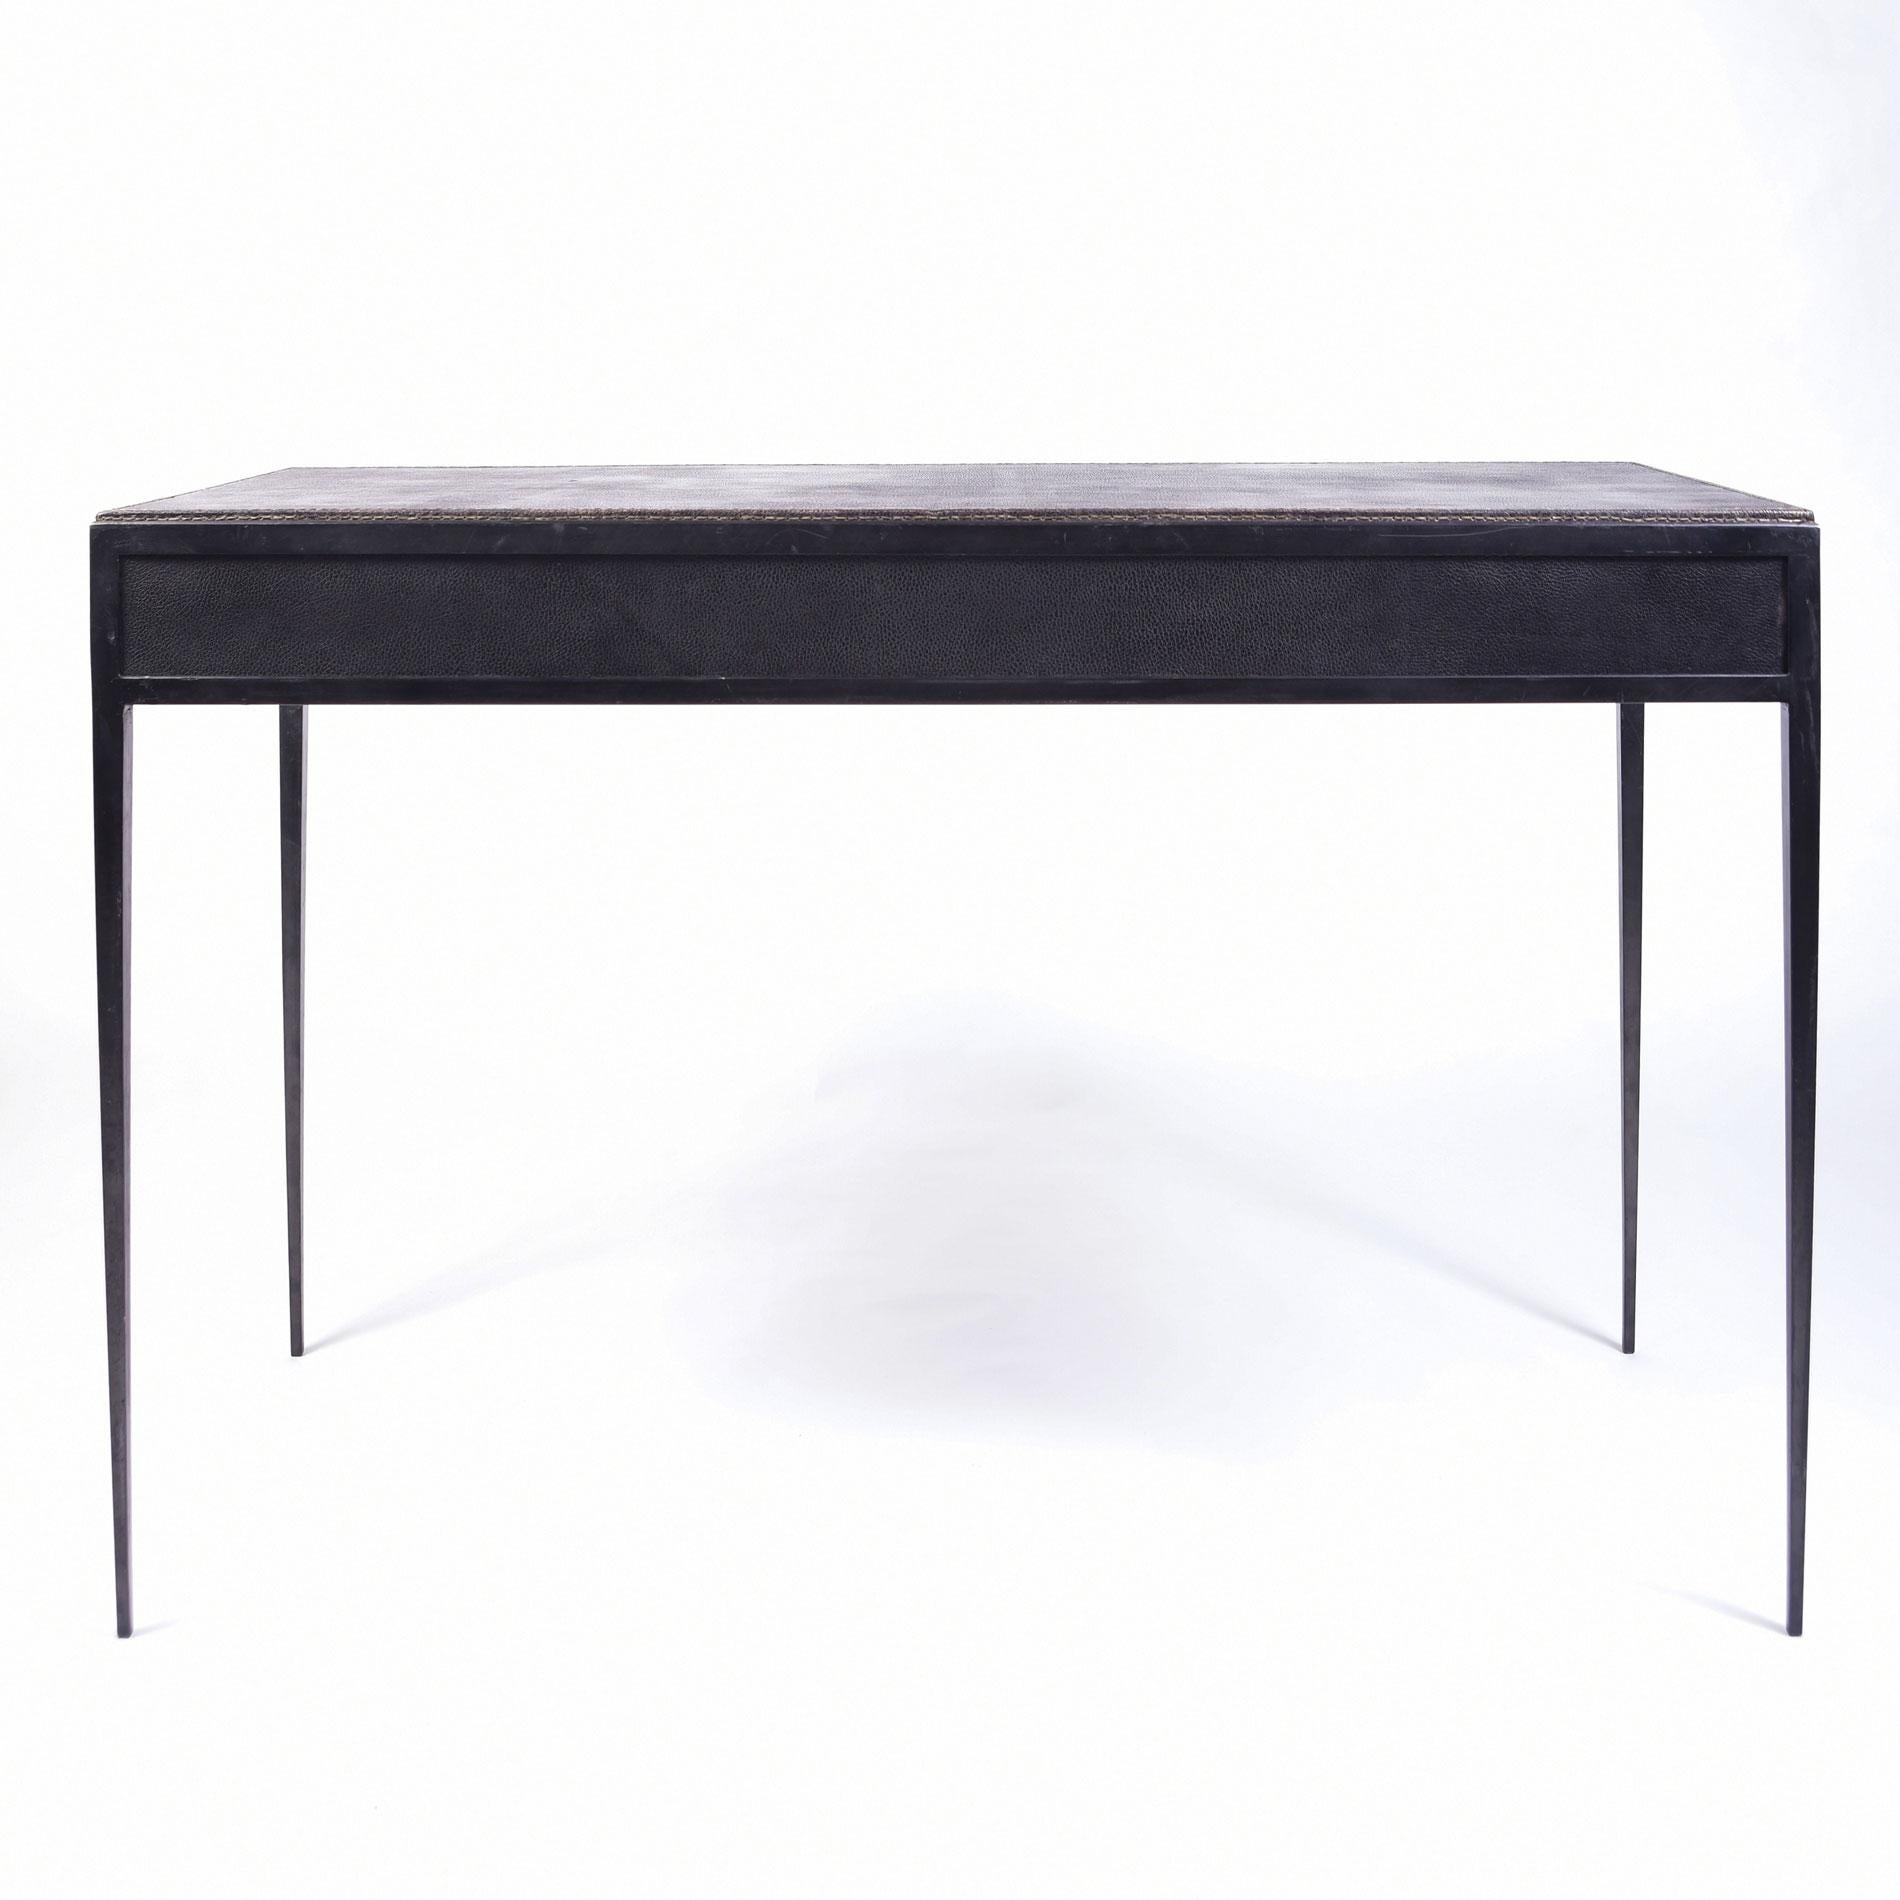 A desk of exceptional quality, demonstrating exactly the designer's mastery of perfectly balanced minimalist lines, with their tapered legs and precise detailing. Iron legs support the black/grey leather top with two cerejeira (Brazilian oak)